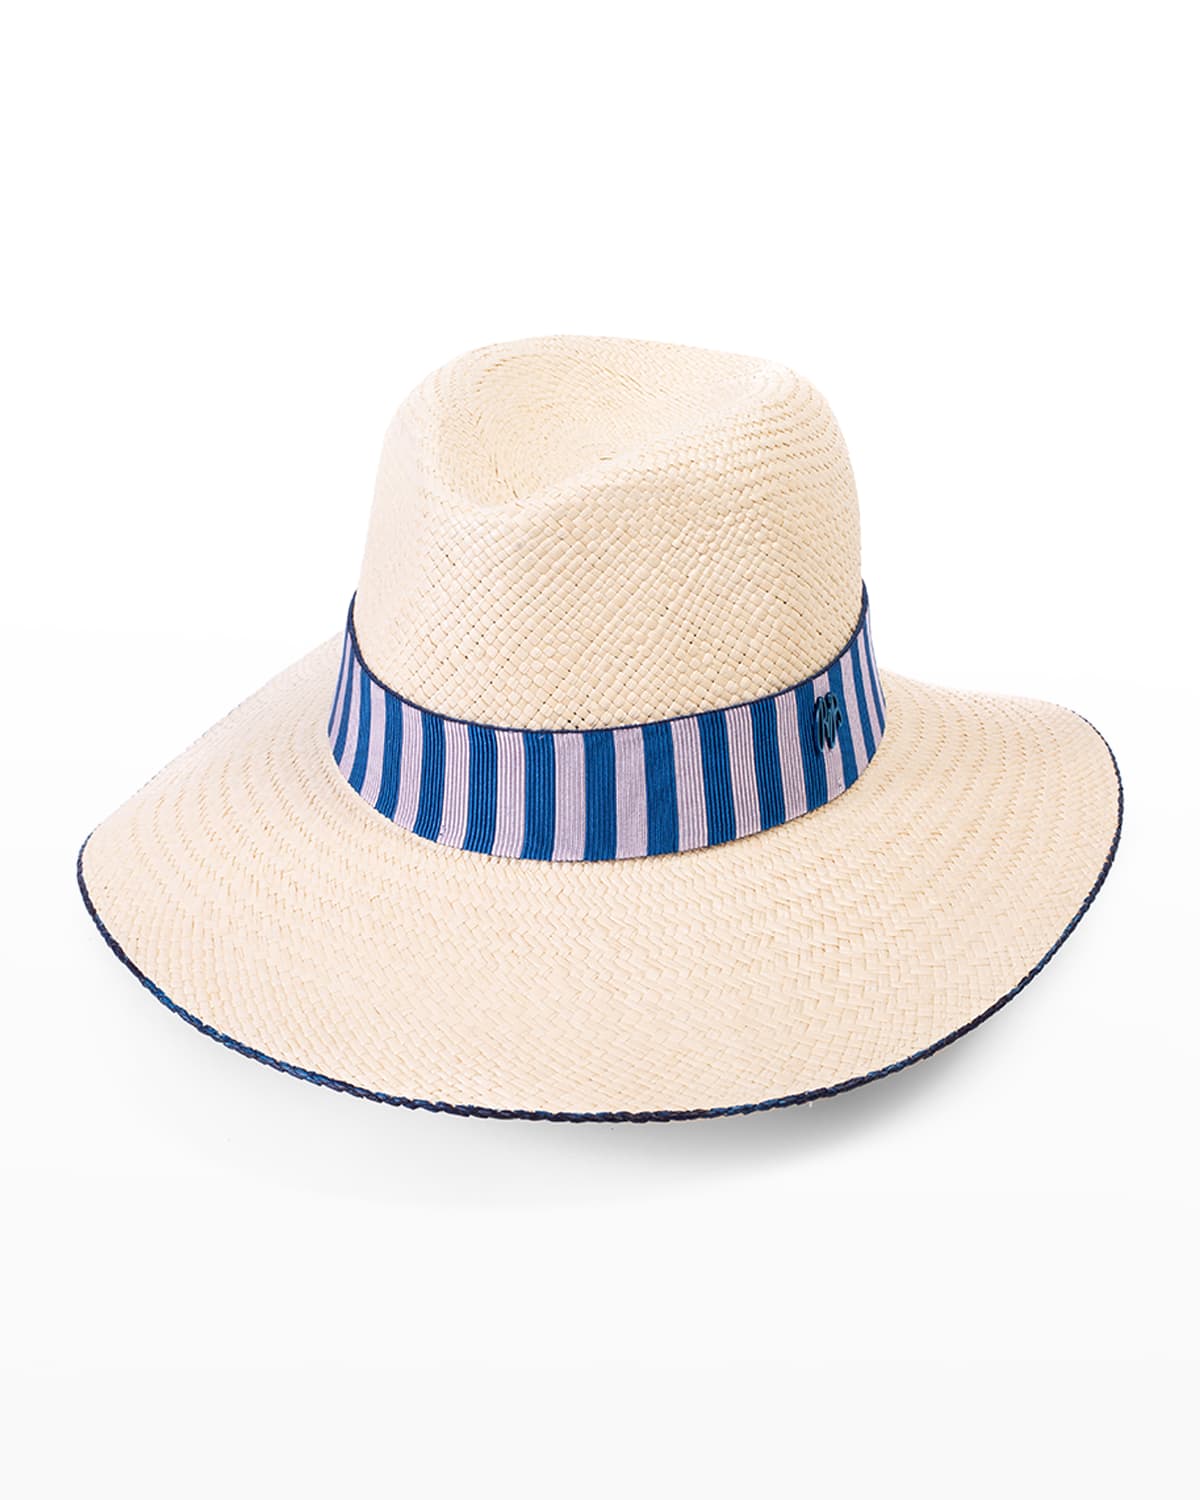 Unisex Trilby Hat with Striped Band and Jewel detail Available in a Selection of Sizes 